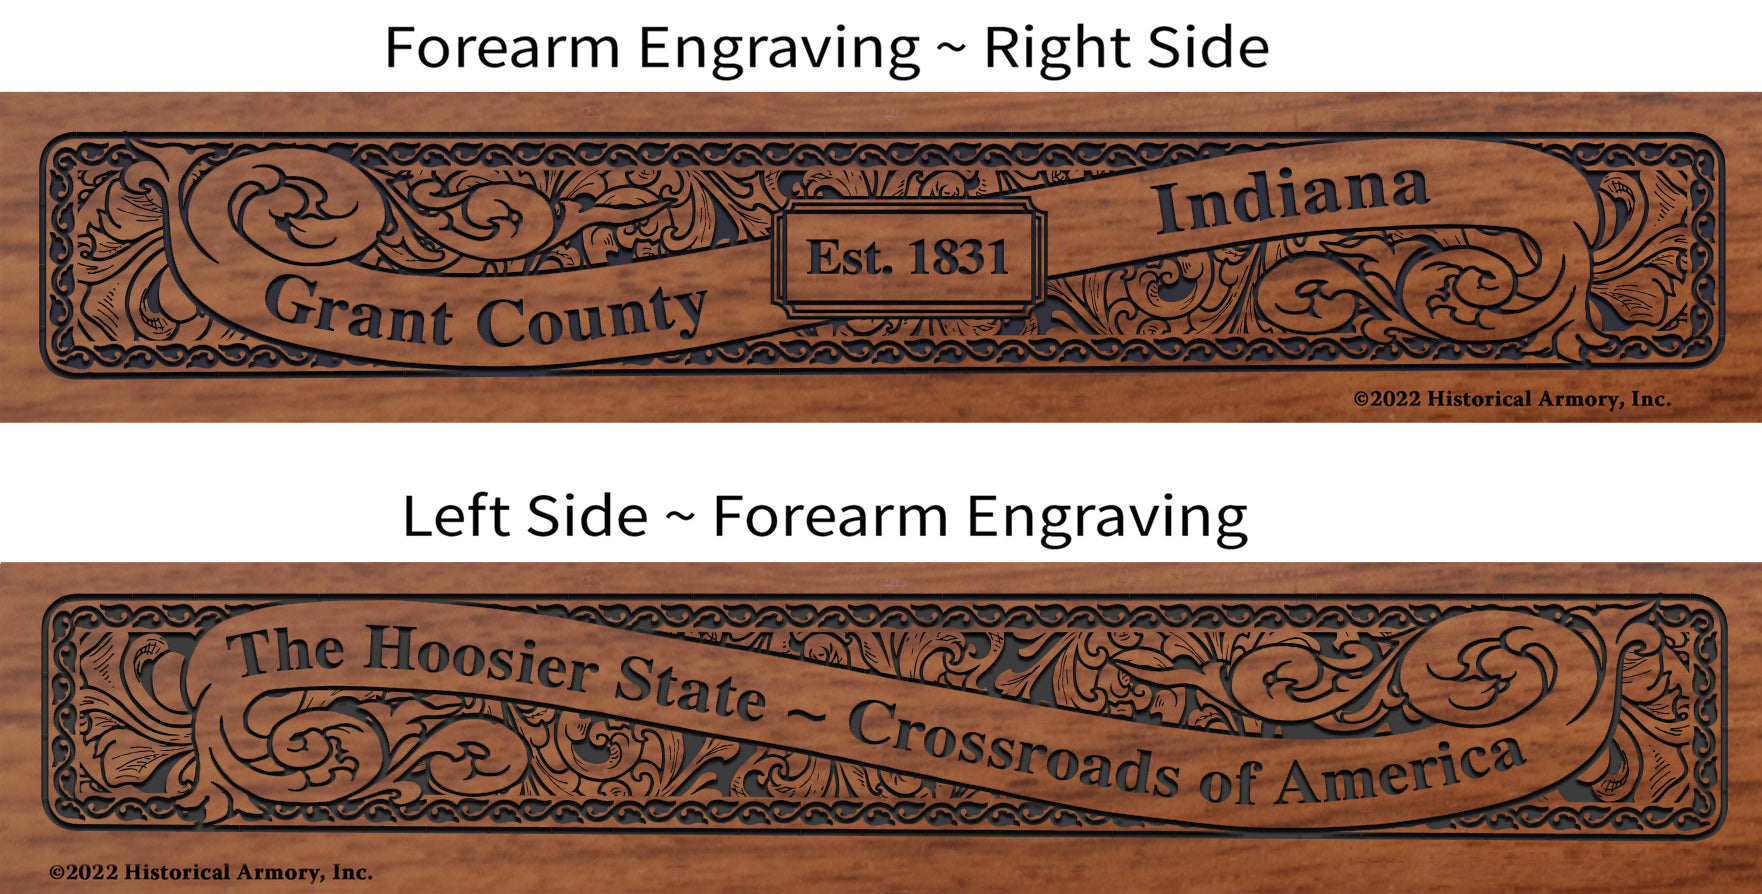 Grant County Indiana Engraved Rifle Forearm